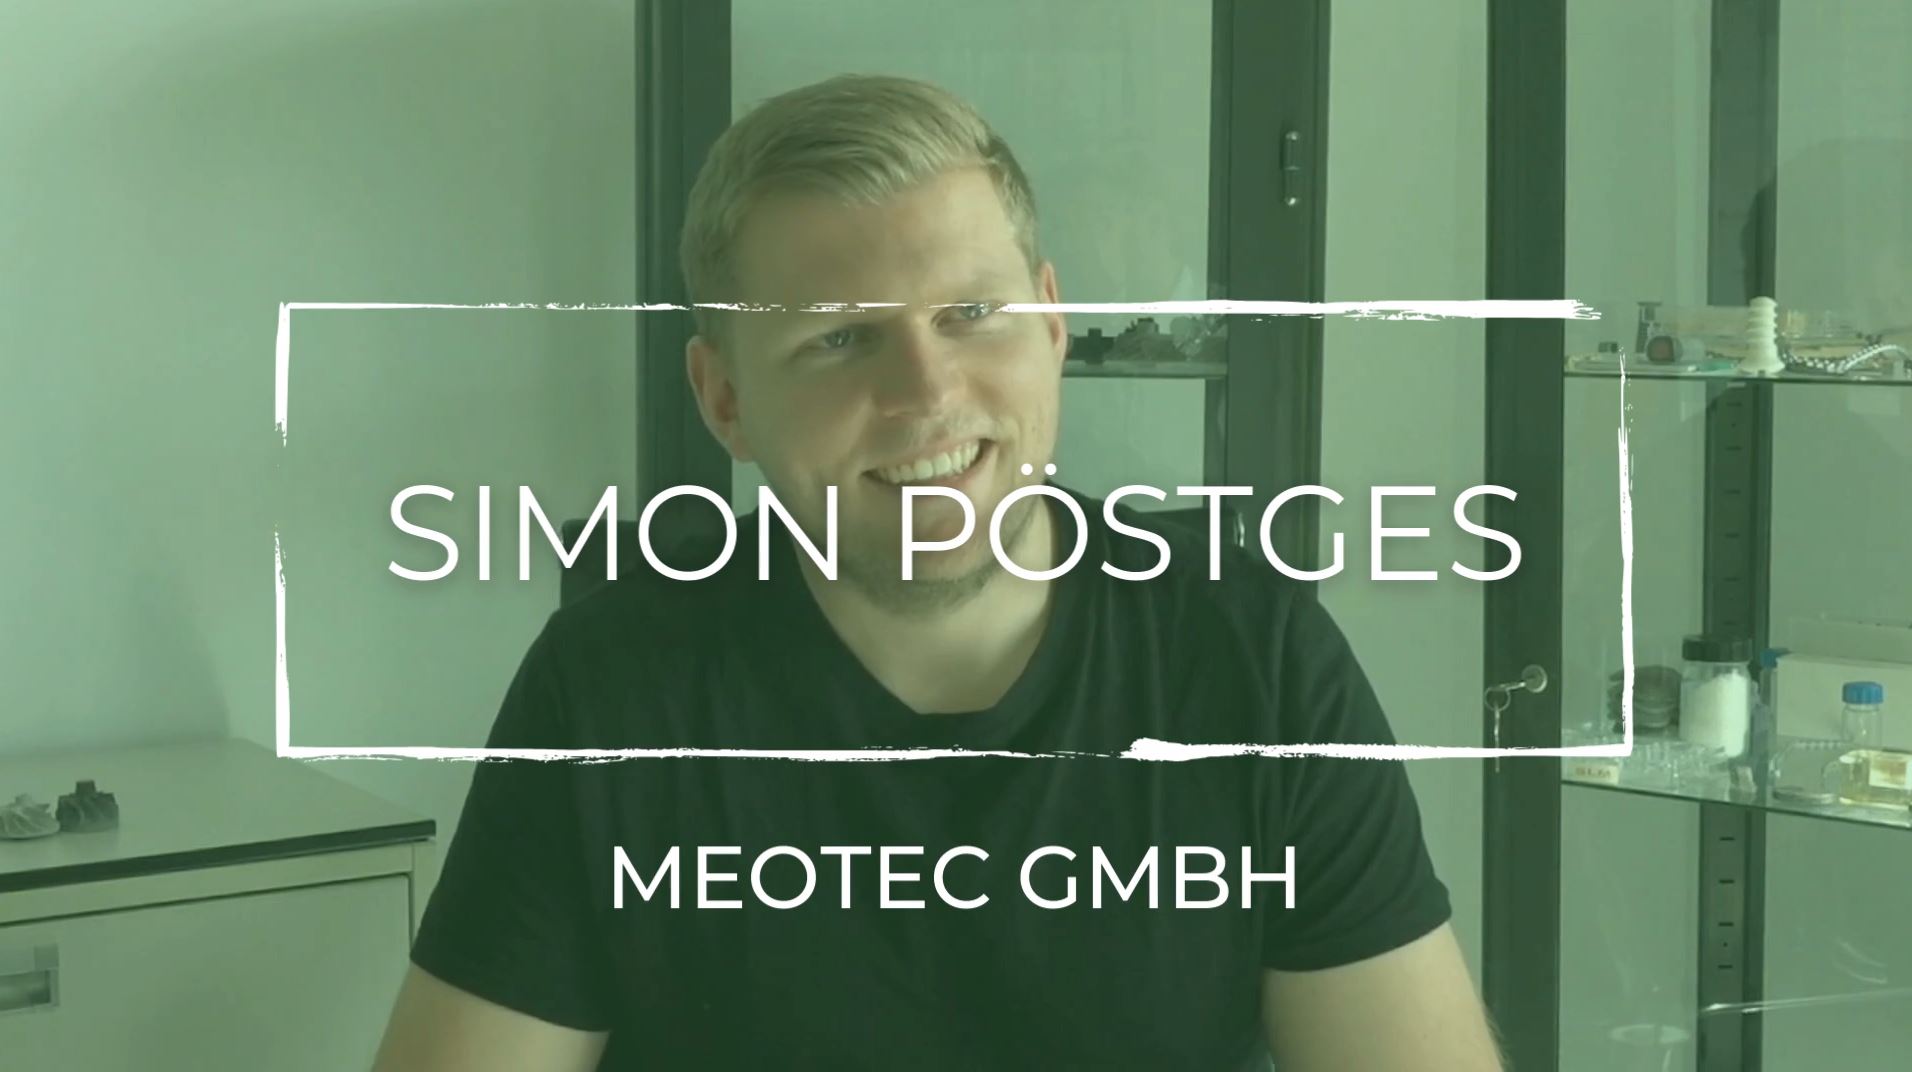 Get to know BIOMET4D researcher Simon Pöstges from Meotec